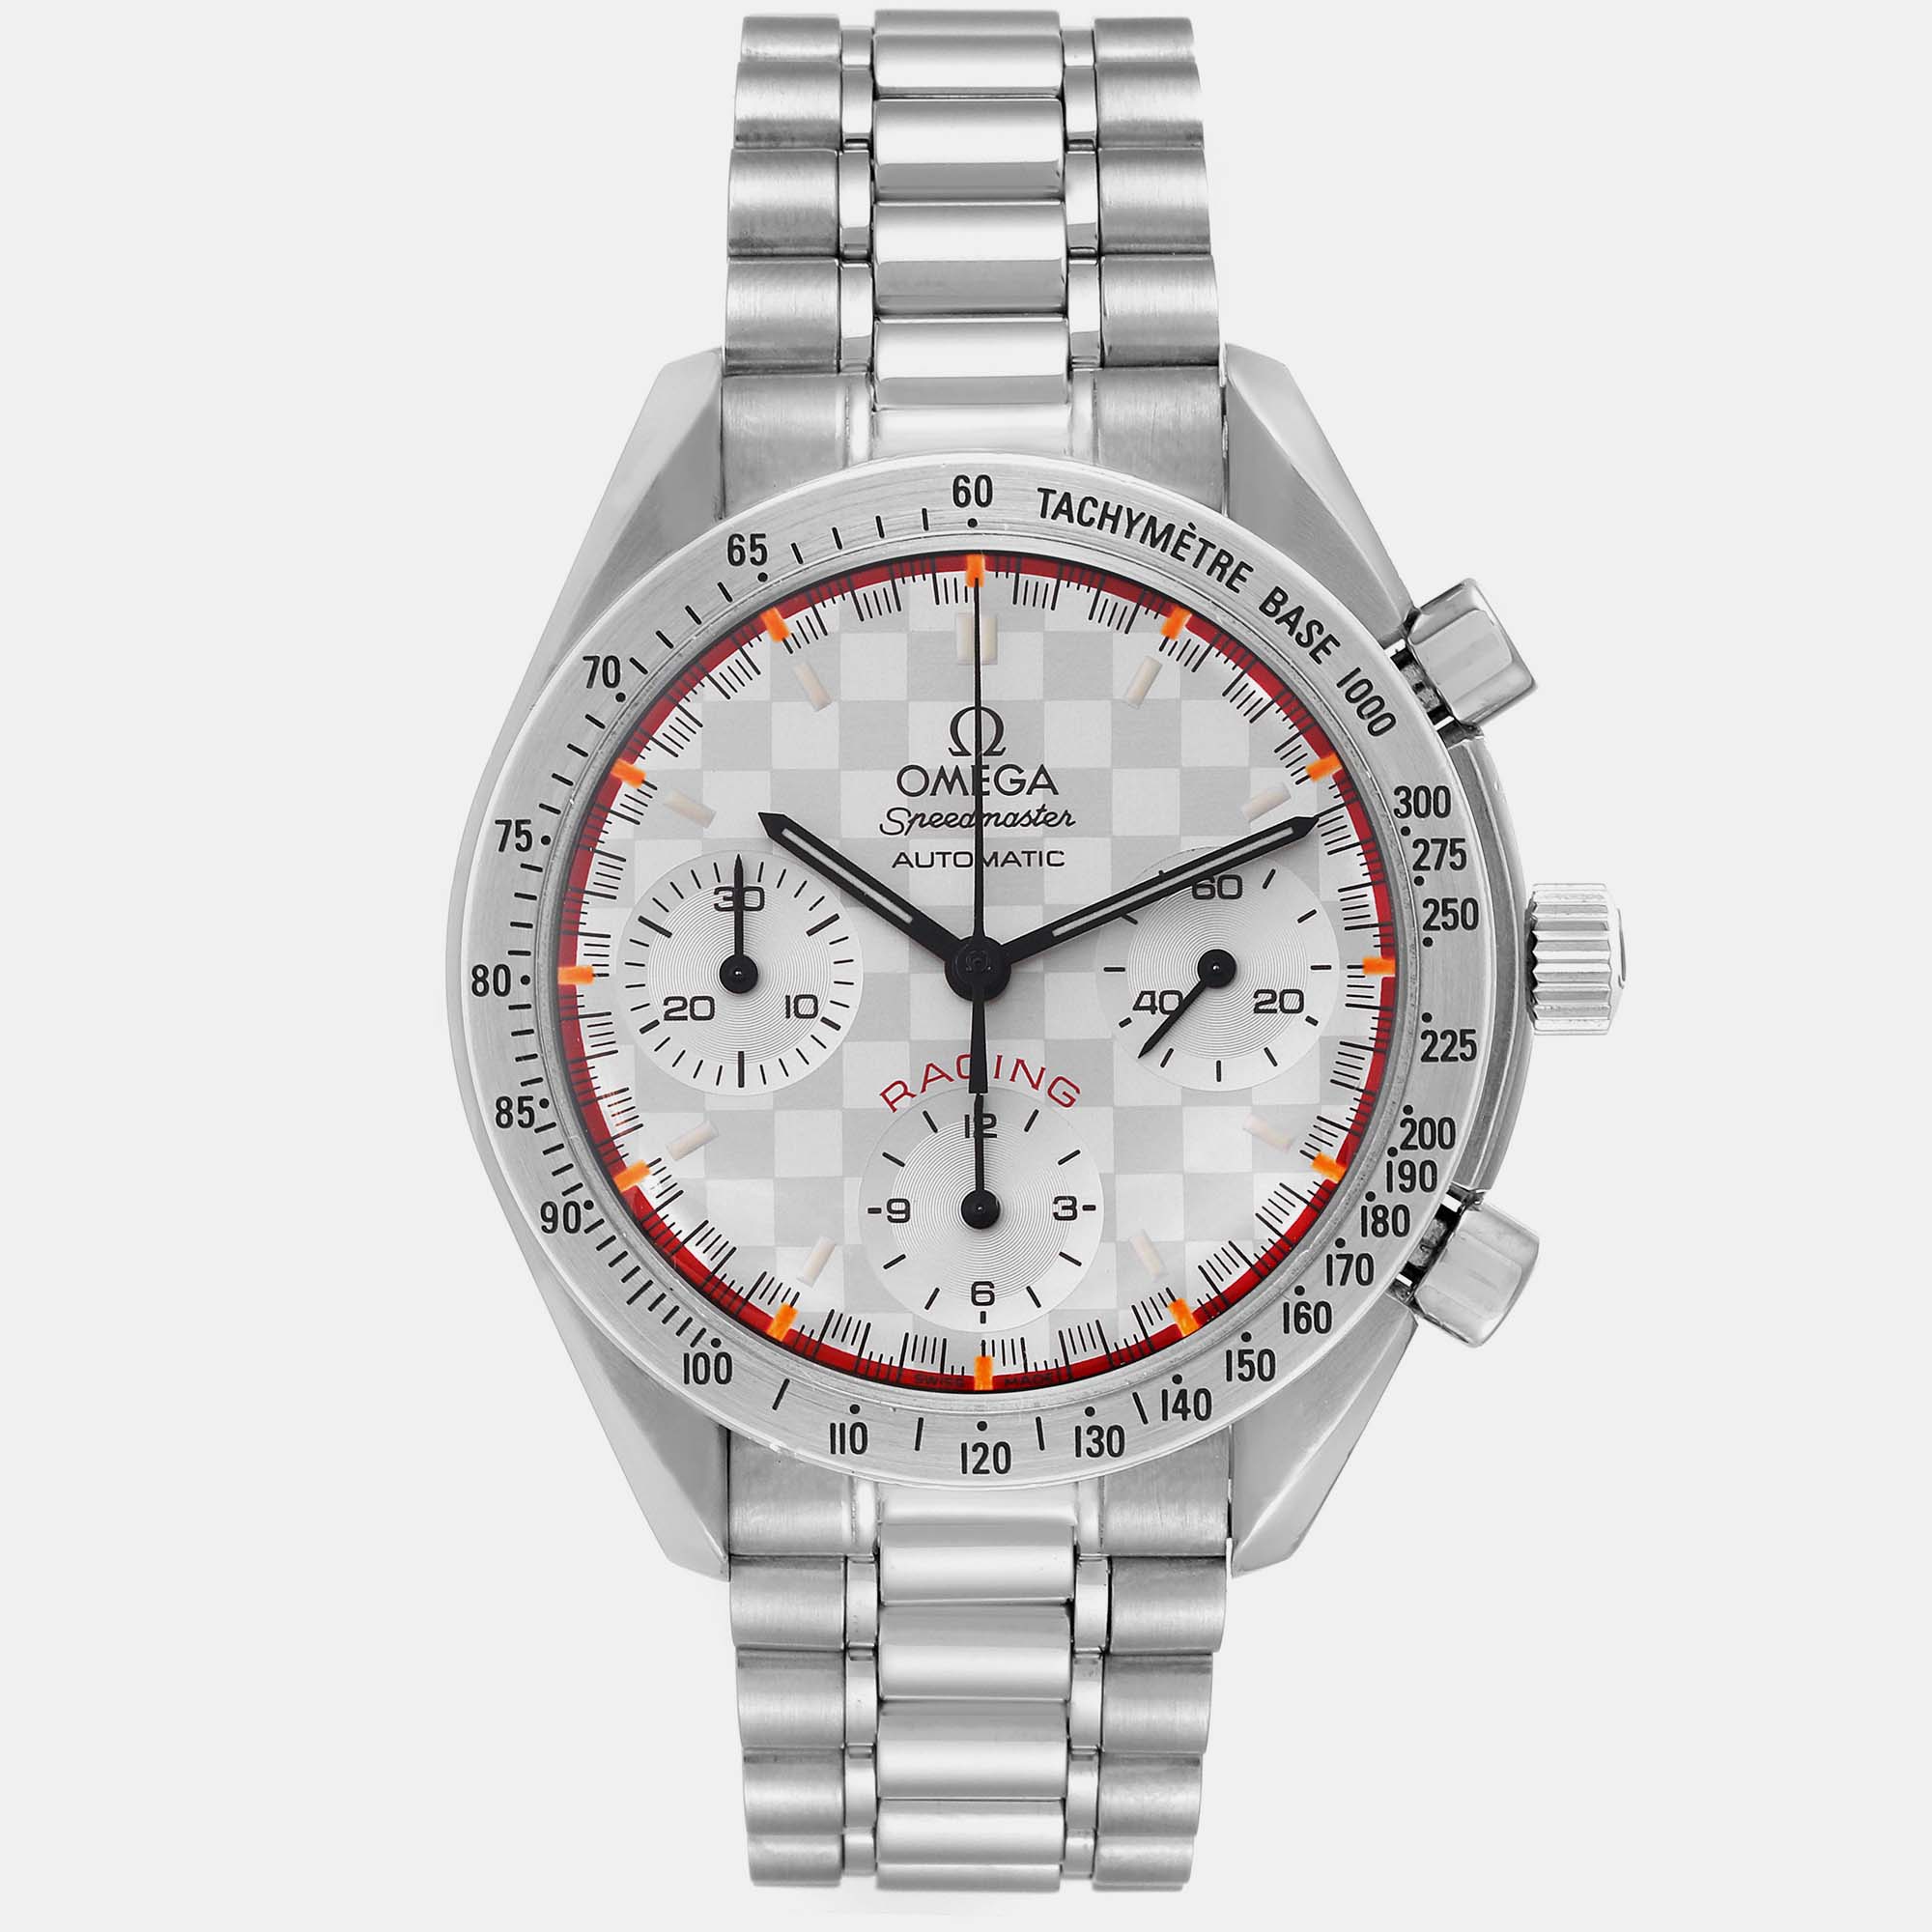 A classy silhouette made of high quality materials and packed with precision and luxury makes this authentic Omega wristwatch the perfect choice for a sophisticated finish to any look. It is a grand creation to elevate the everyday experience.